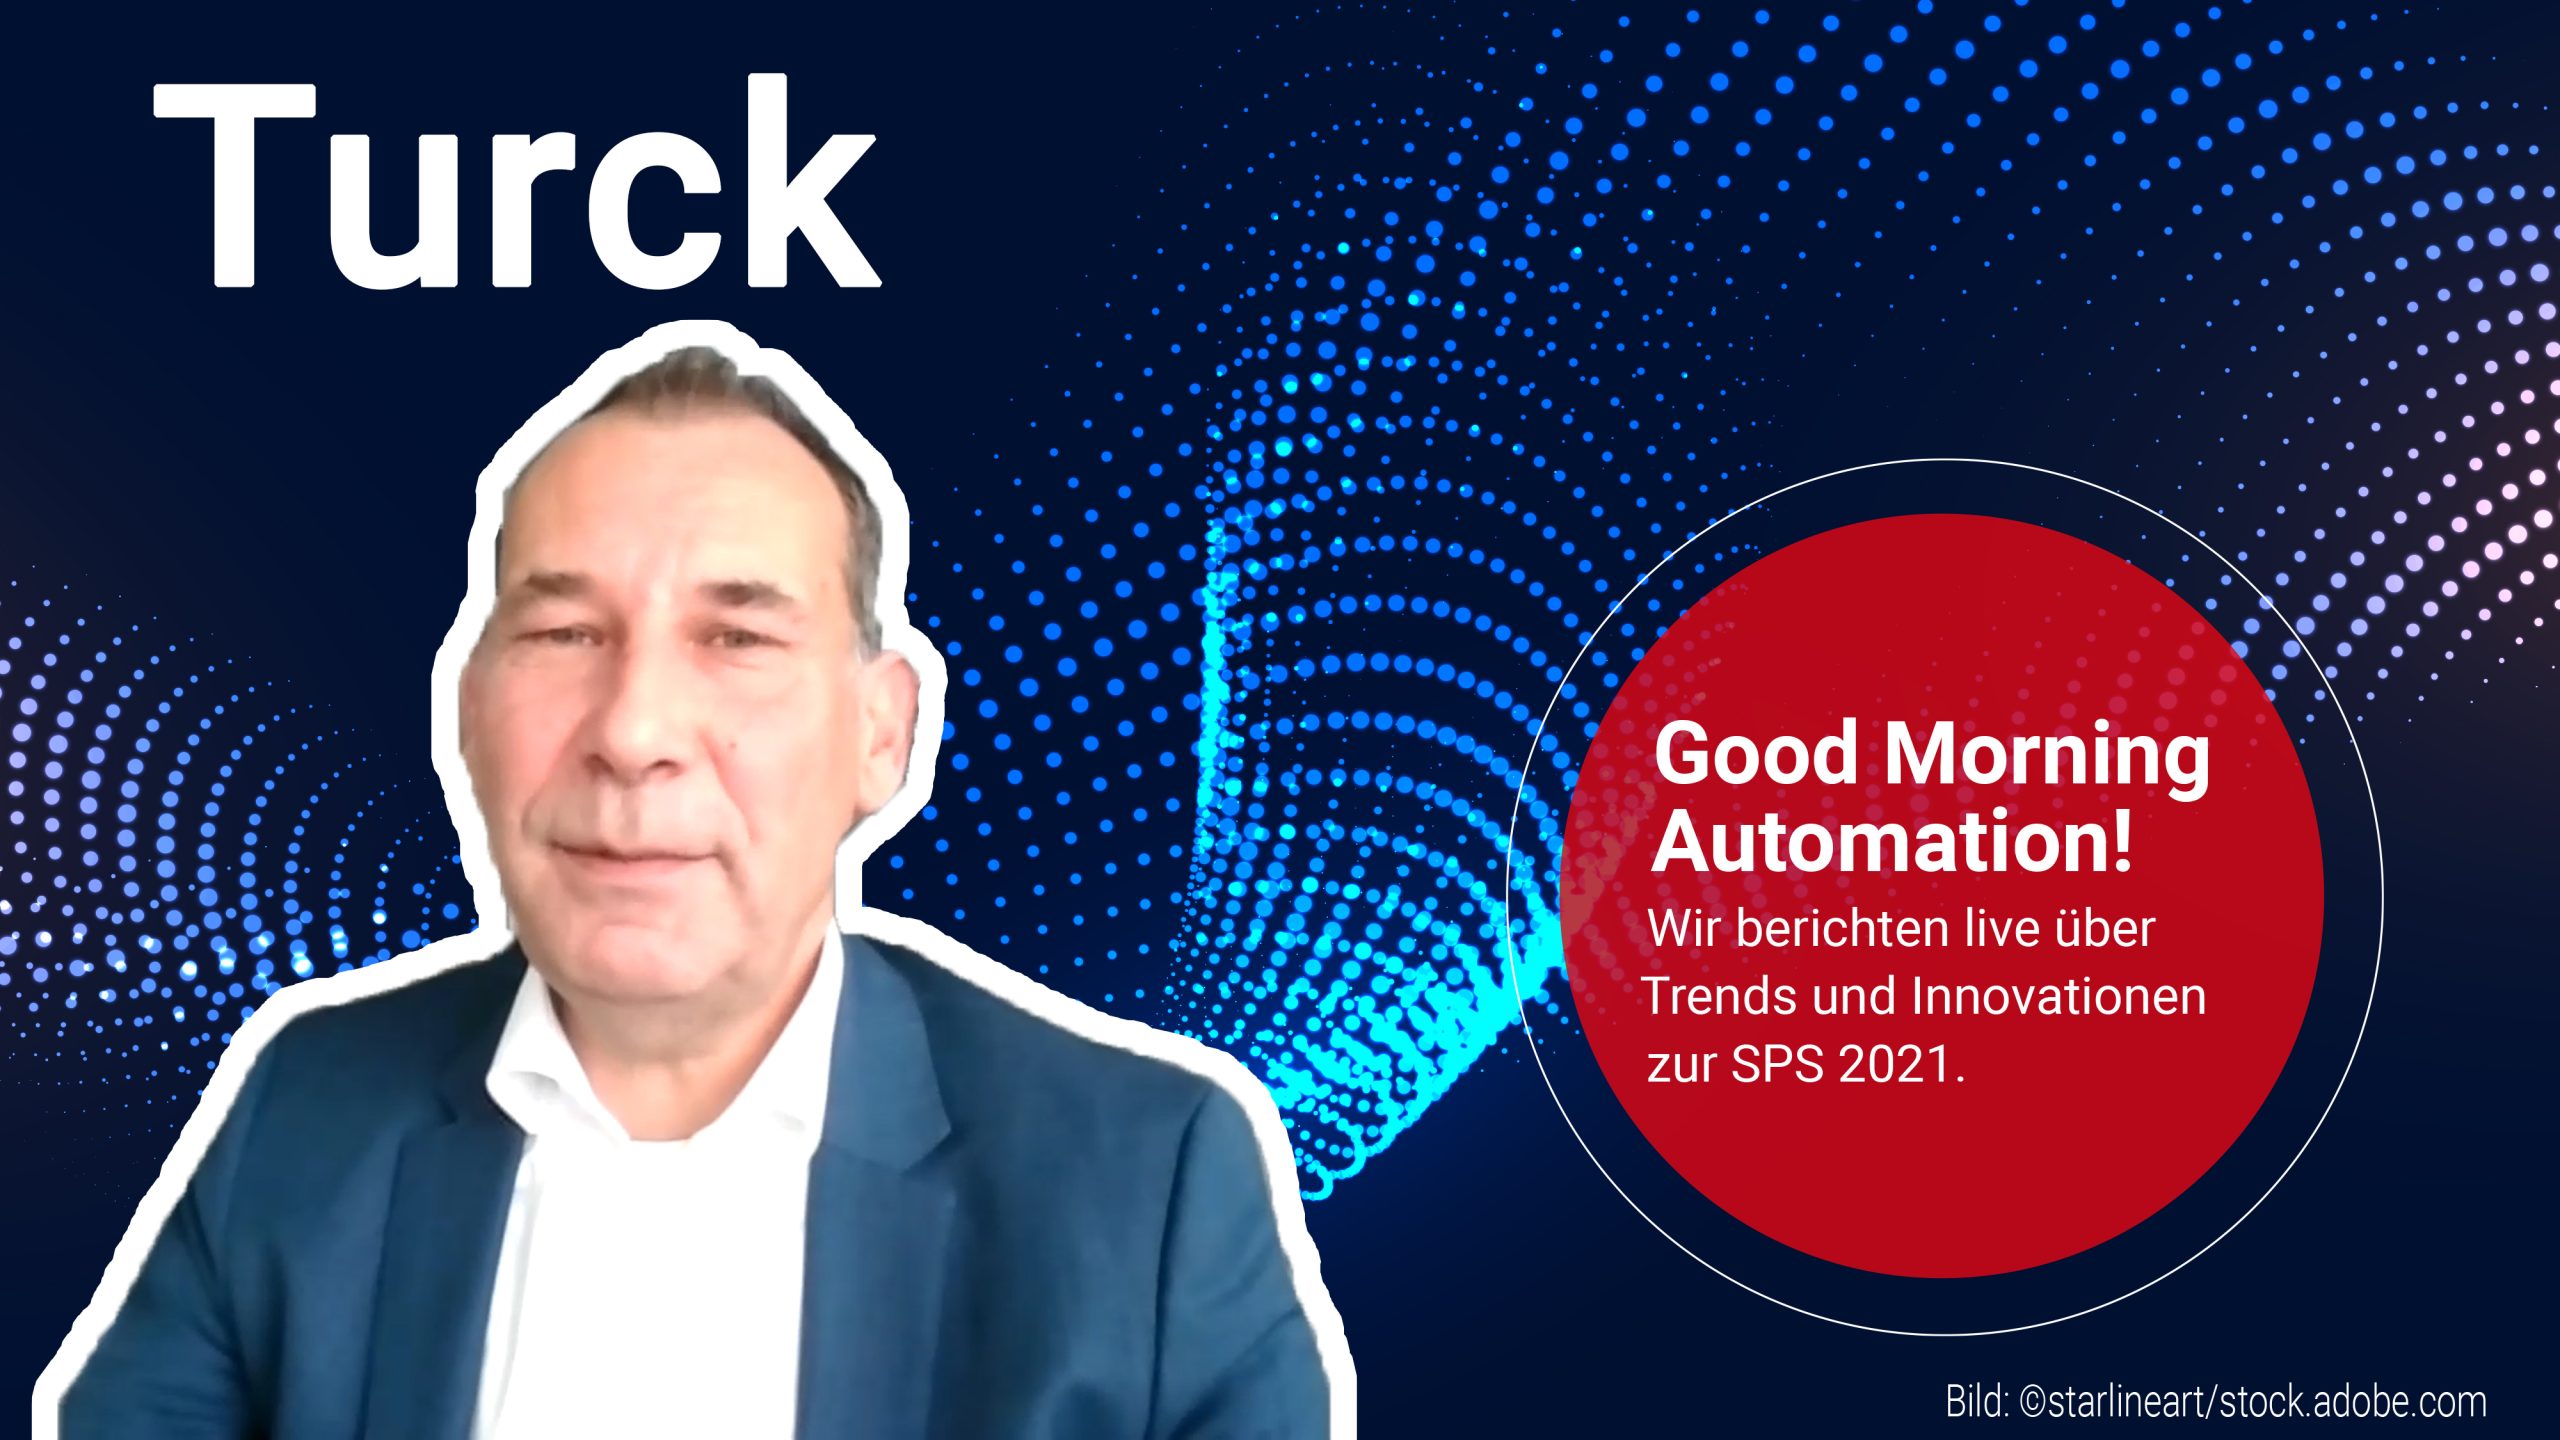 Turck bei Good Morning Automation Tag 2